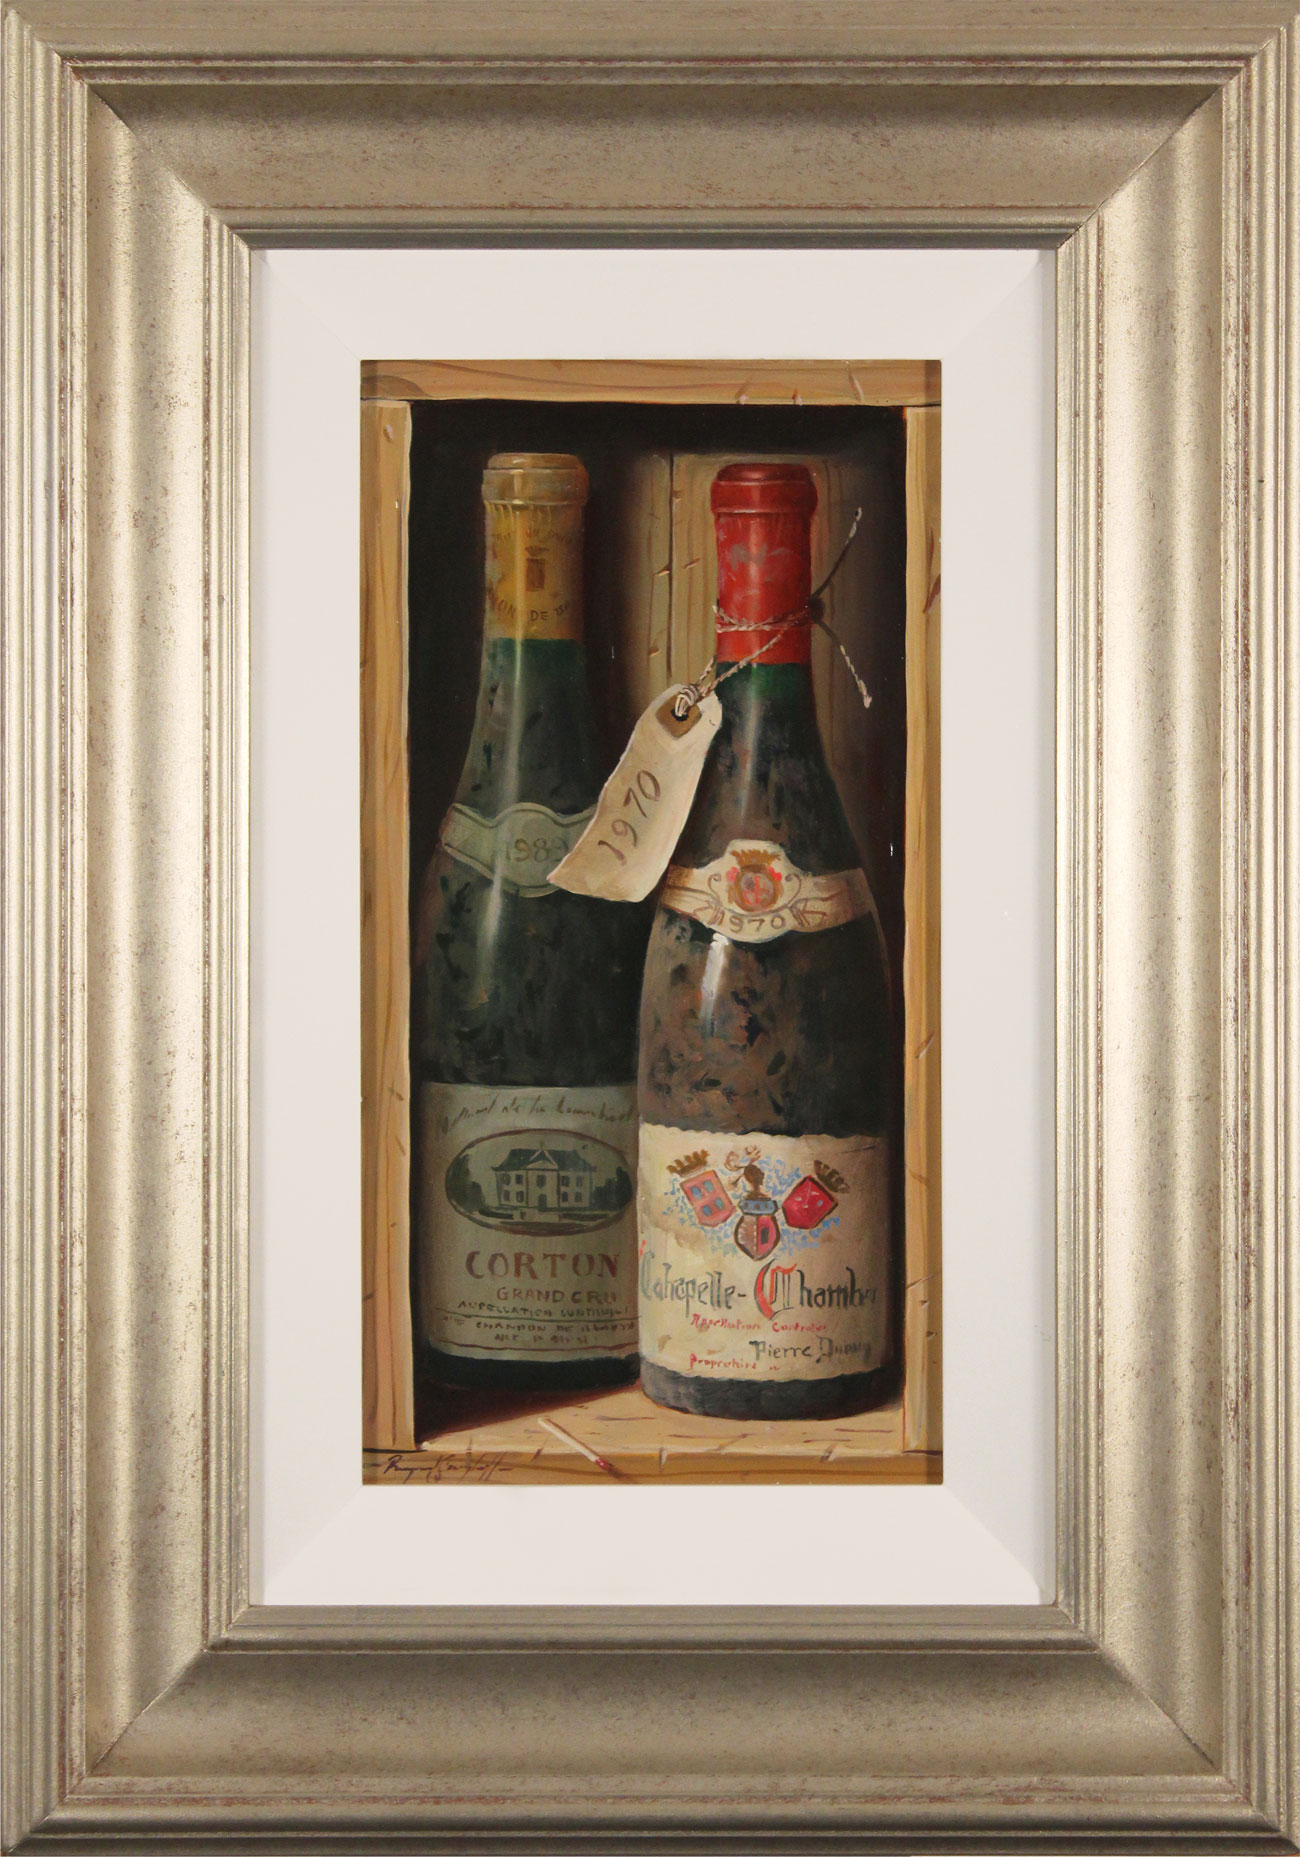 Raymond Campbell, Original oil painting on panel, Corton Grand Cru, 1989. Click to enlarge